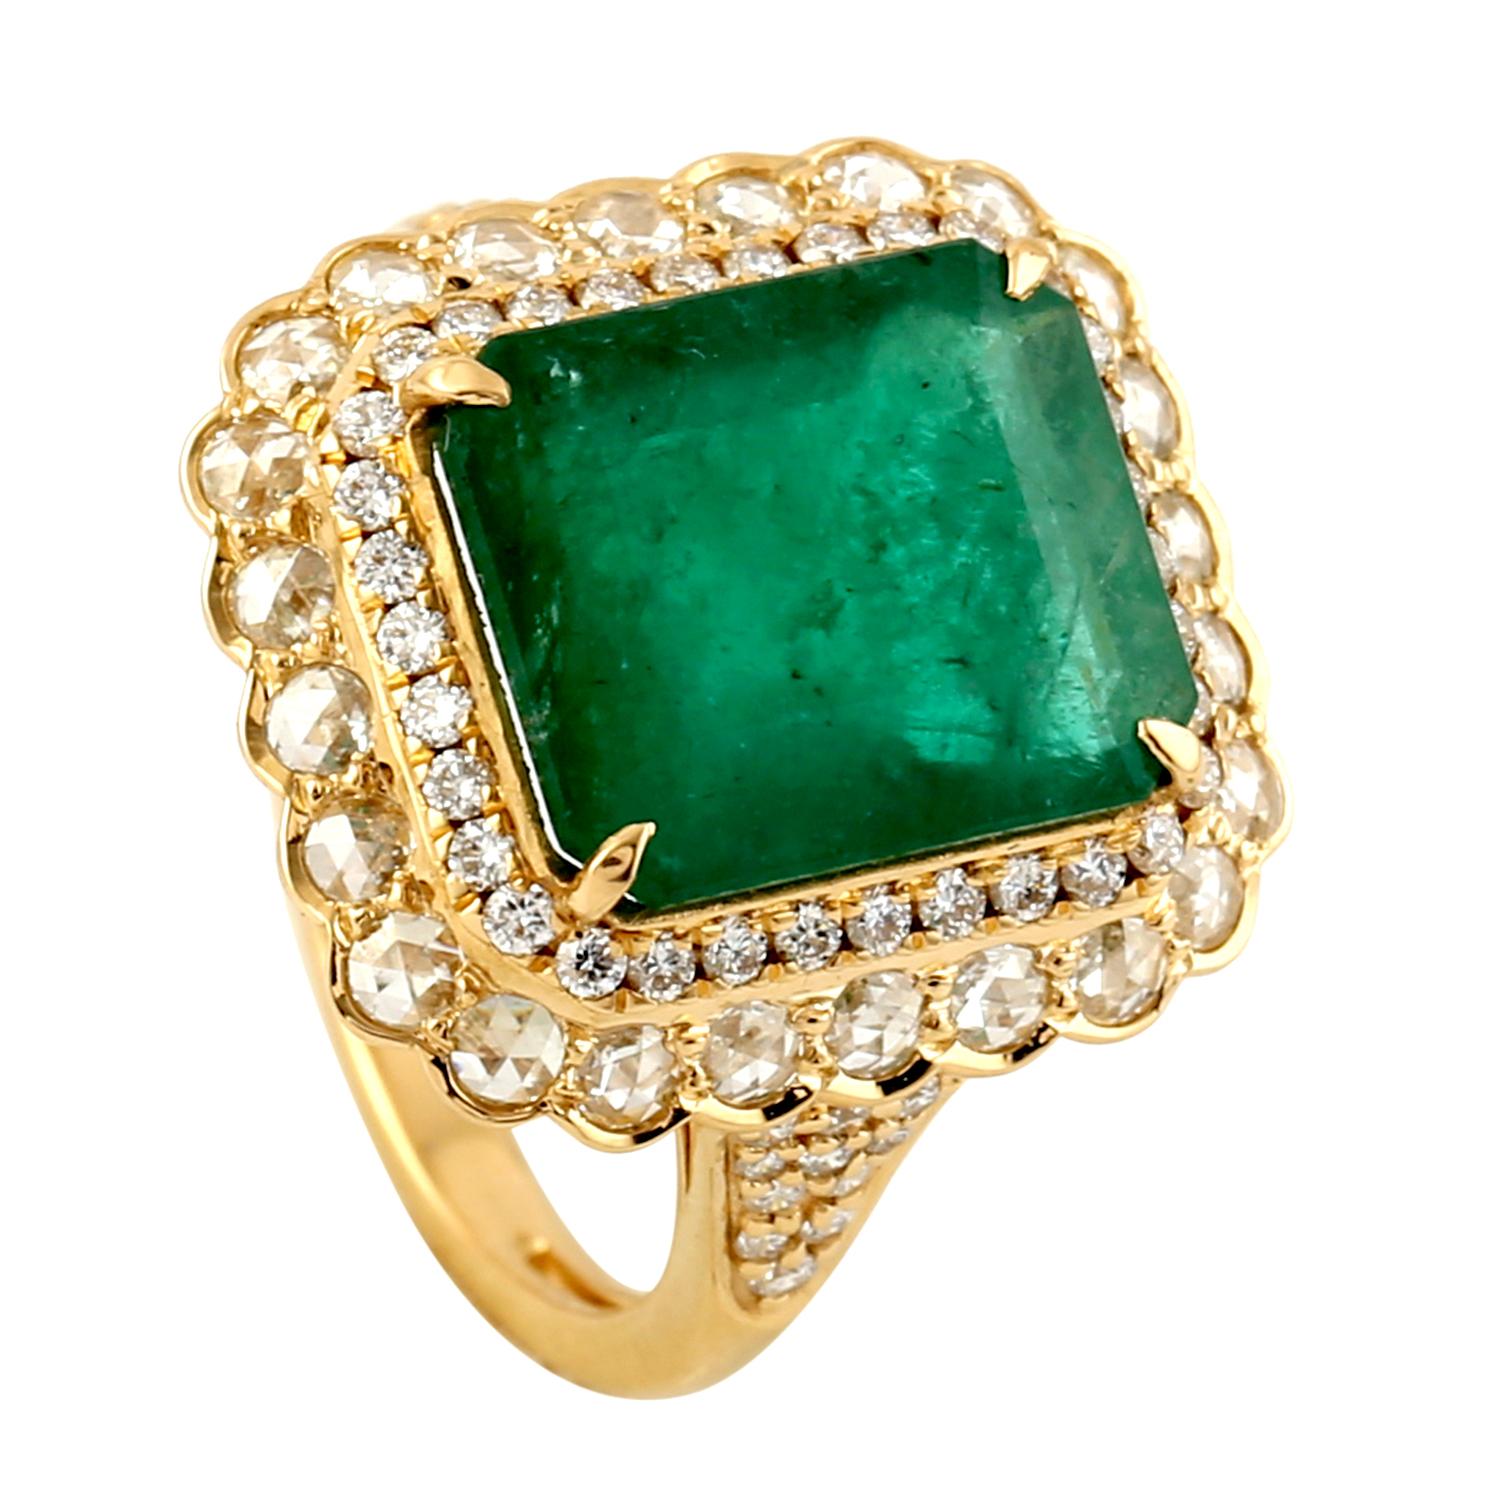 Mixed Cut Octogen Shaped Zambian Emerald Cocktail Ring With Diamonds For Sale